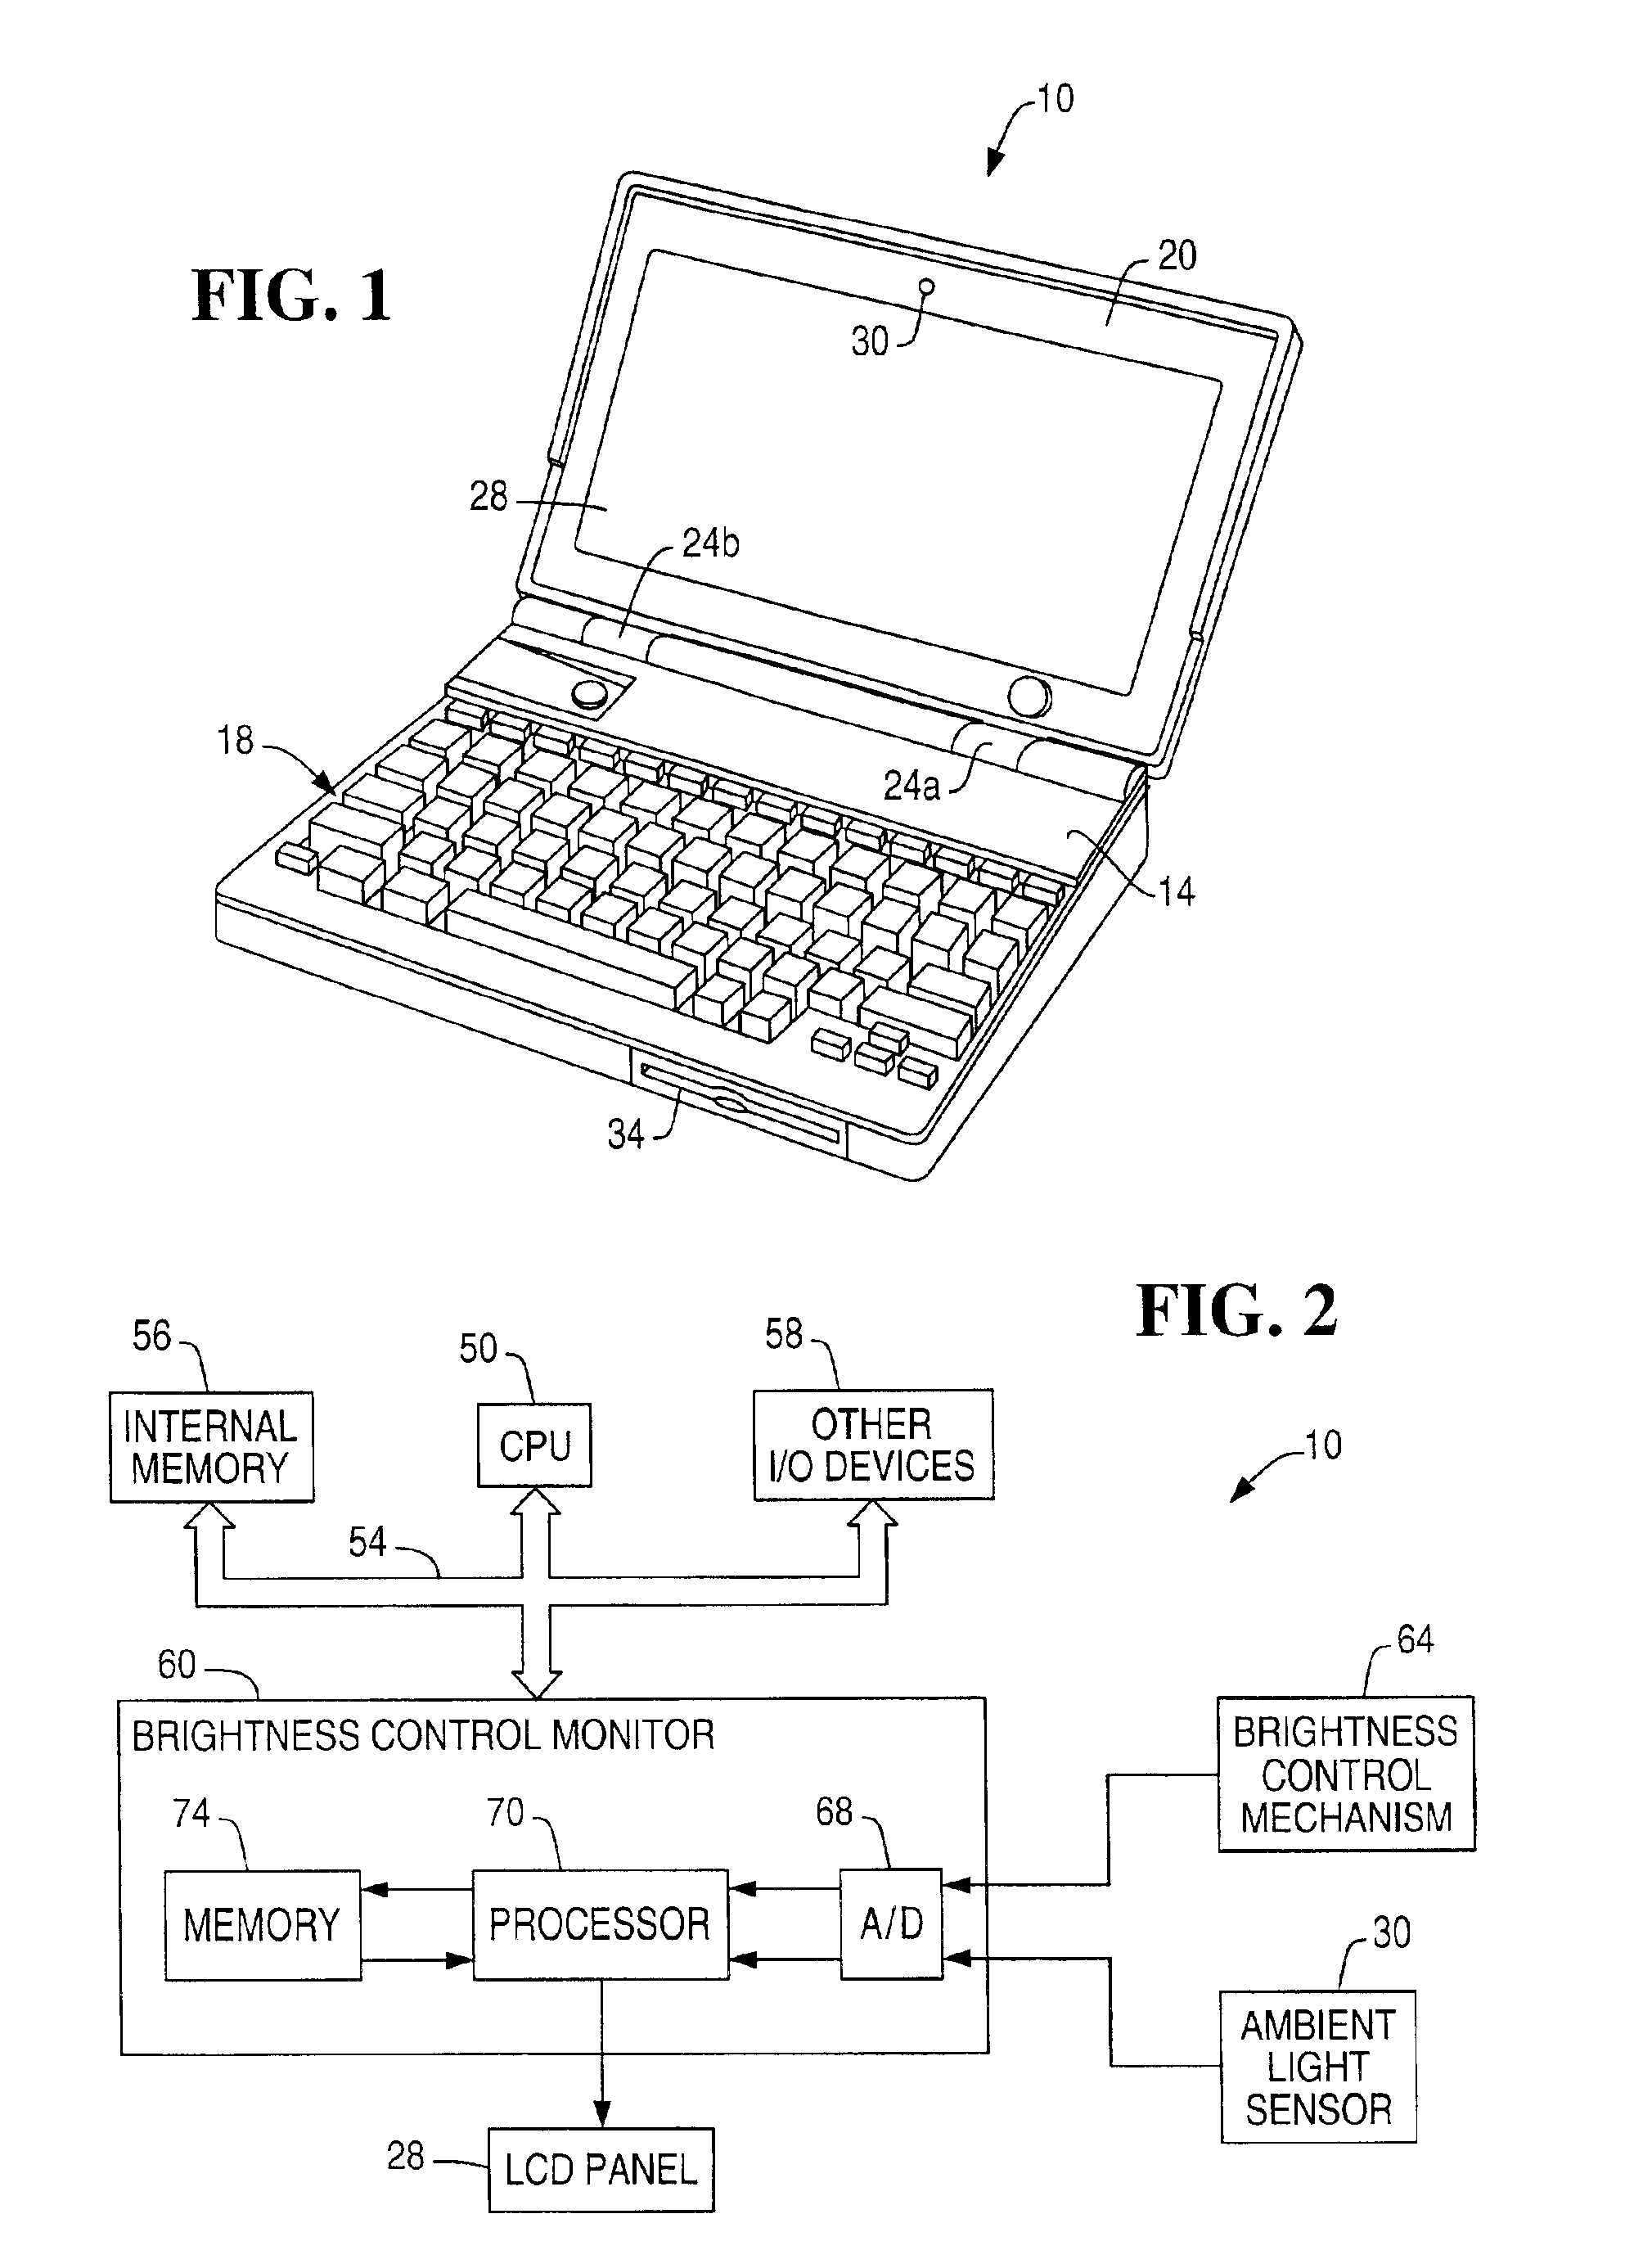 System and method for adjusting display brightness levels according to user preferences